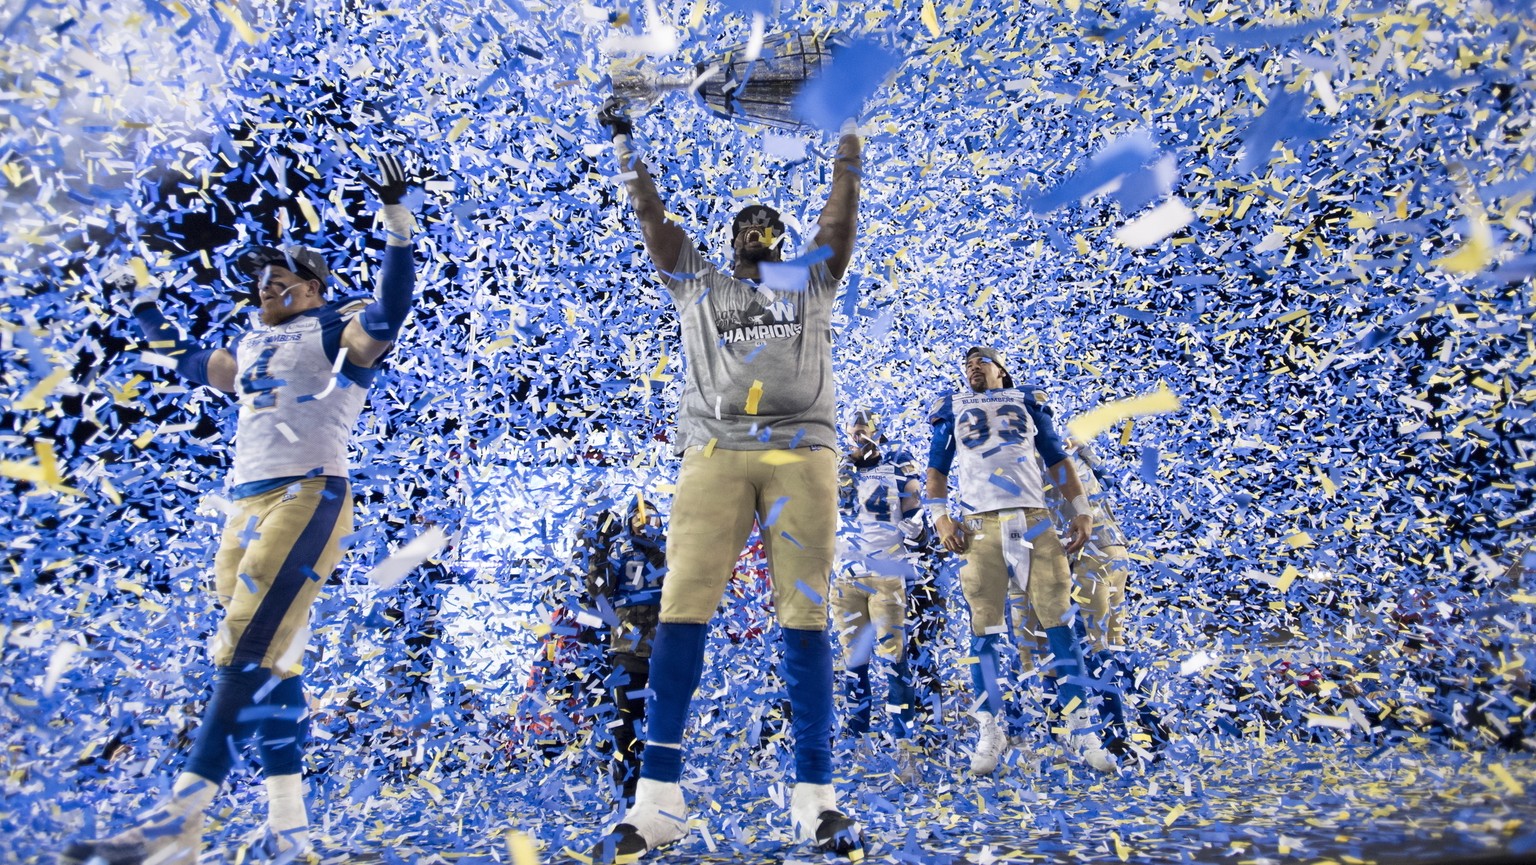 The Winnipeg Blue Bombers celebrate winning the Grey Cup CFL football championship against the Hamilton Tiger Cats, Sunday, Nov. 24, 2019, in Calgary, Alberta. (Nathan Denette/The Canadian Press via A ...